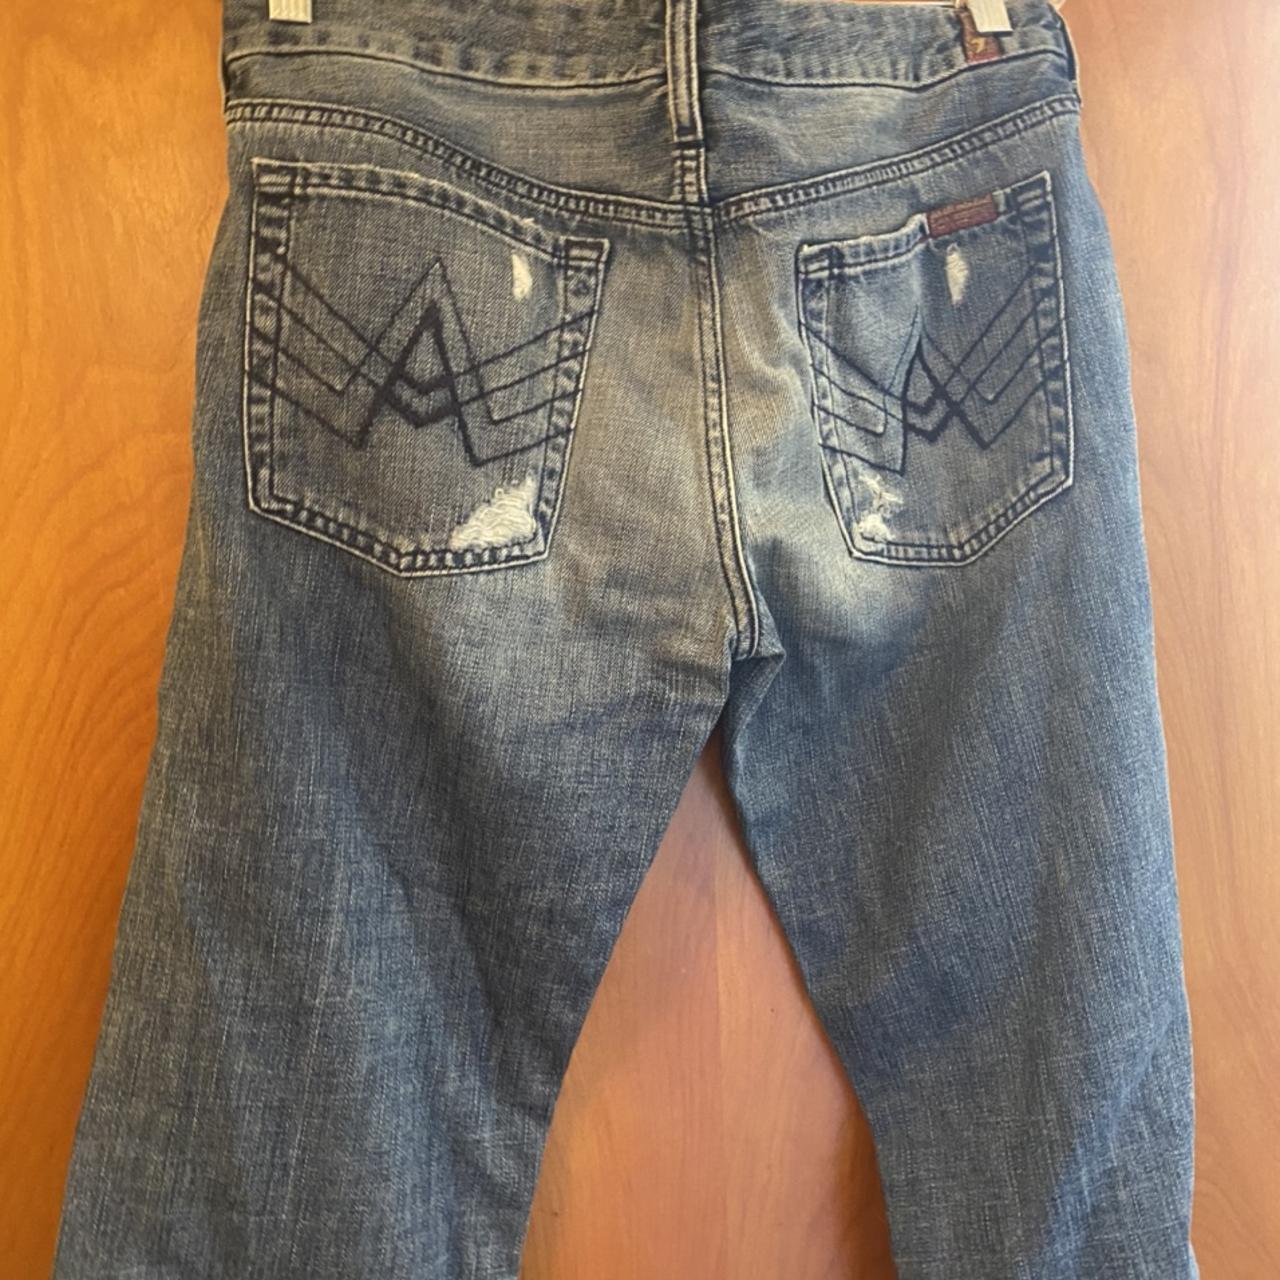 Product Image 3 - Distressed seven jeans with original